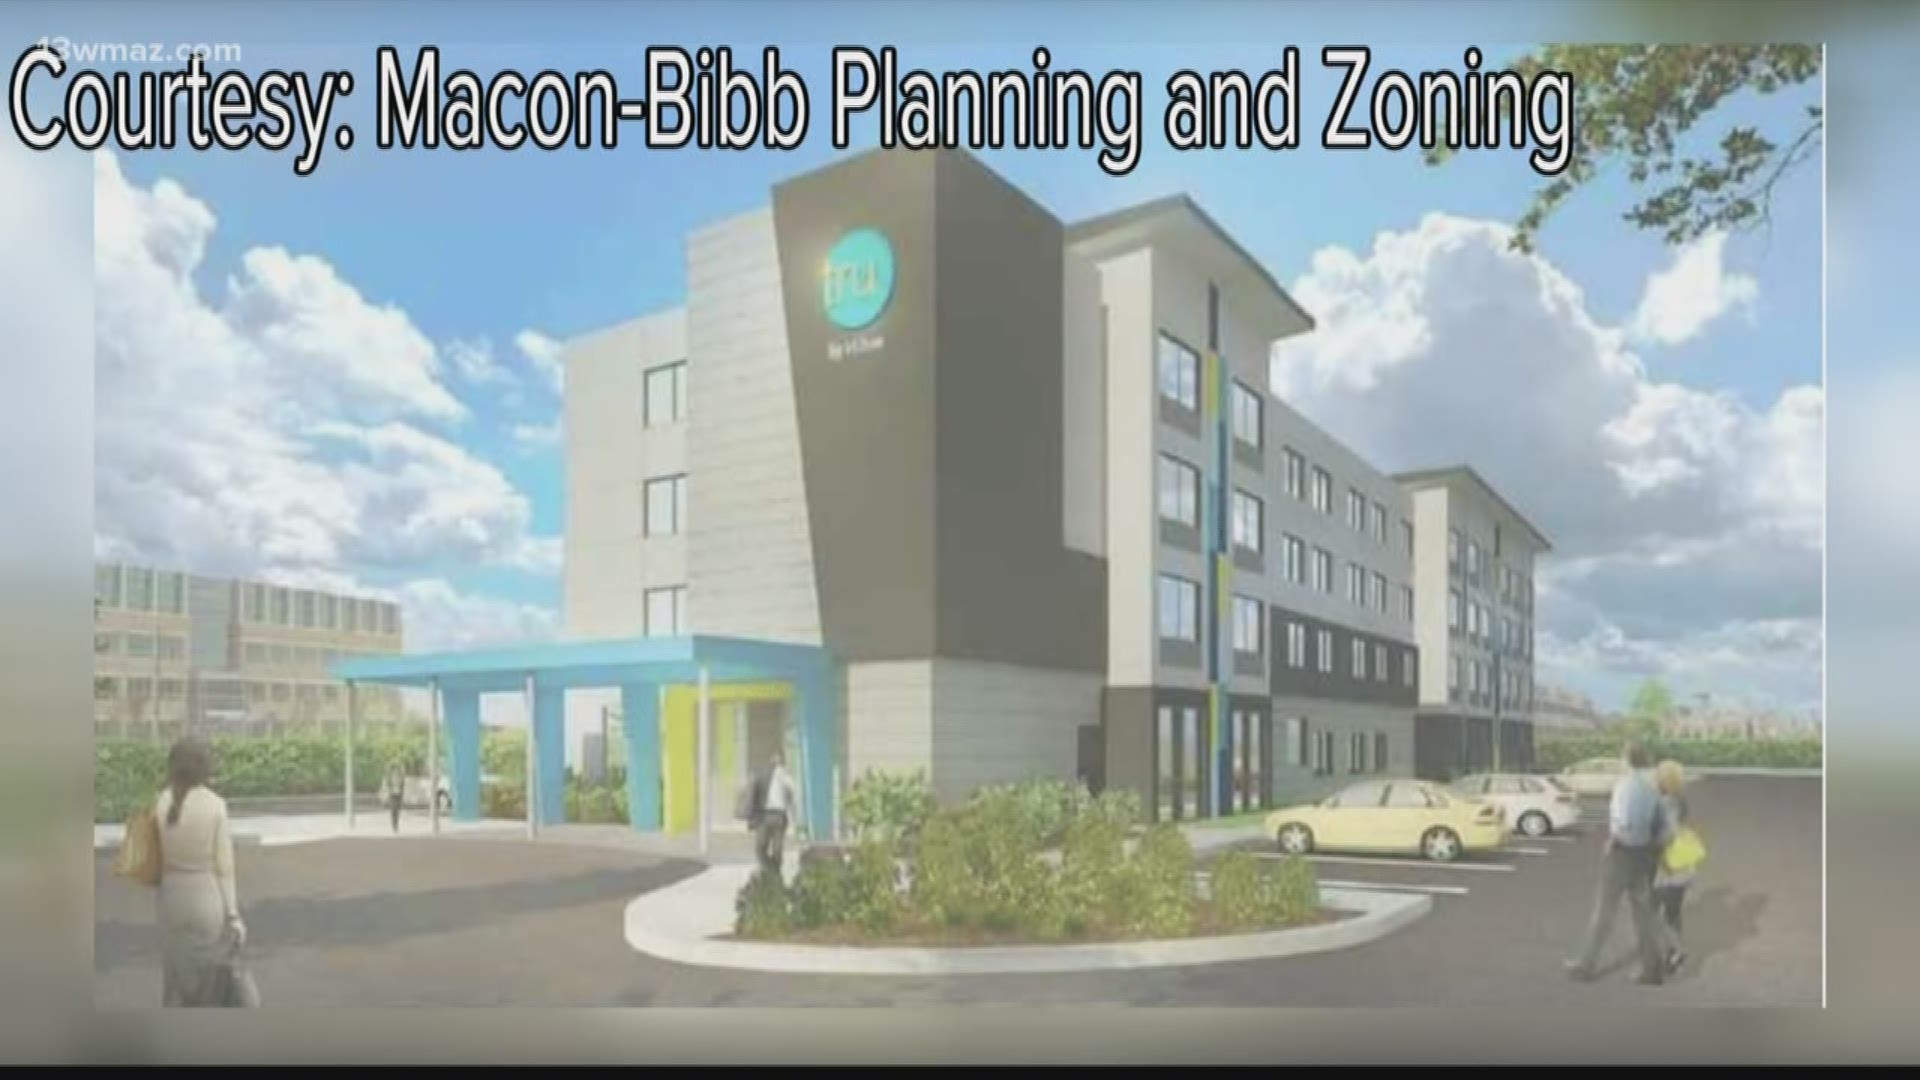 A new hotel could be coming to Bass Road in Macon if Macon-Bibb Planning and Zoning approves the proposal. Here's how some neighbors are feeling about it.